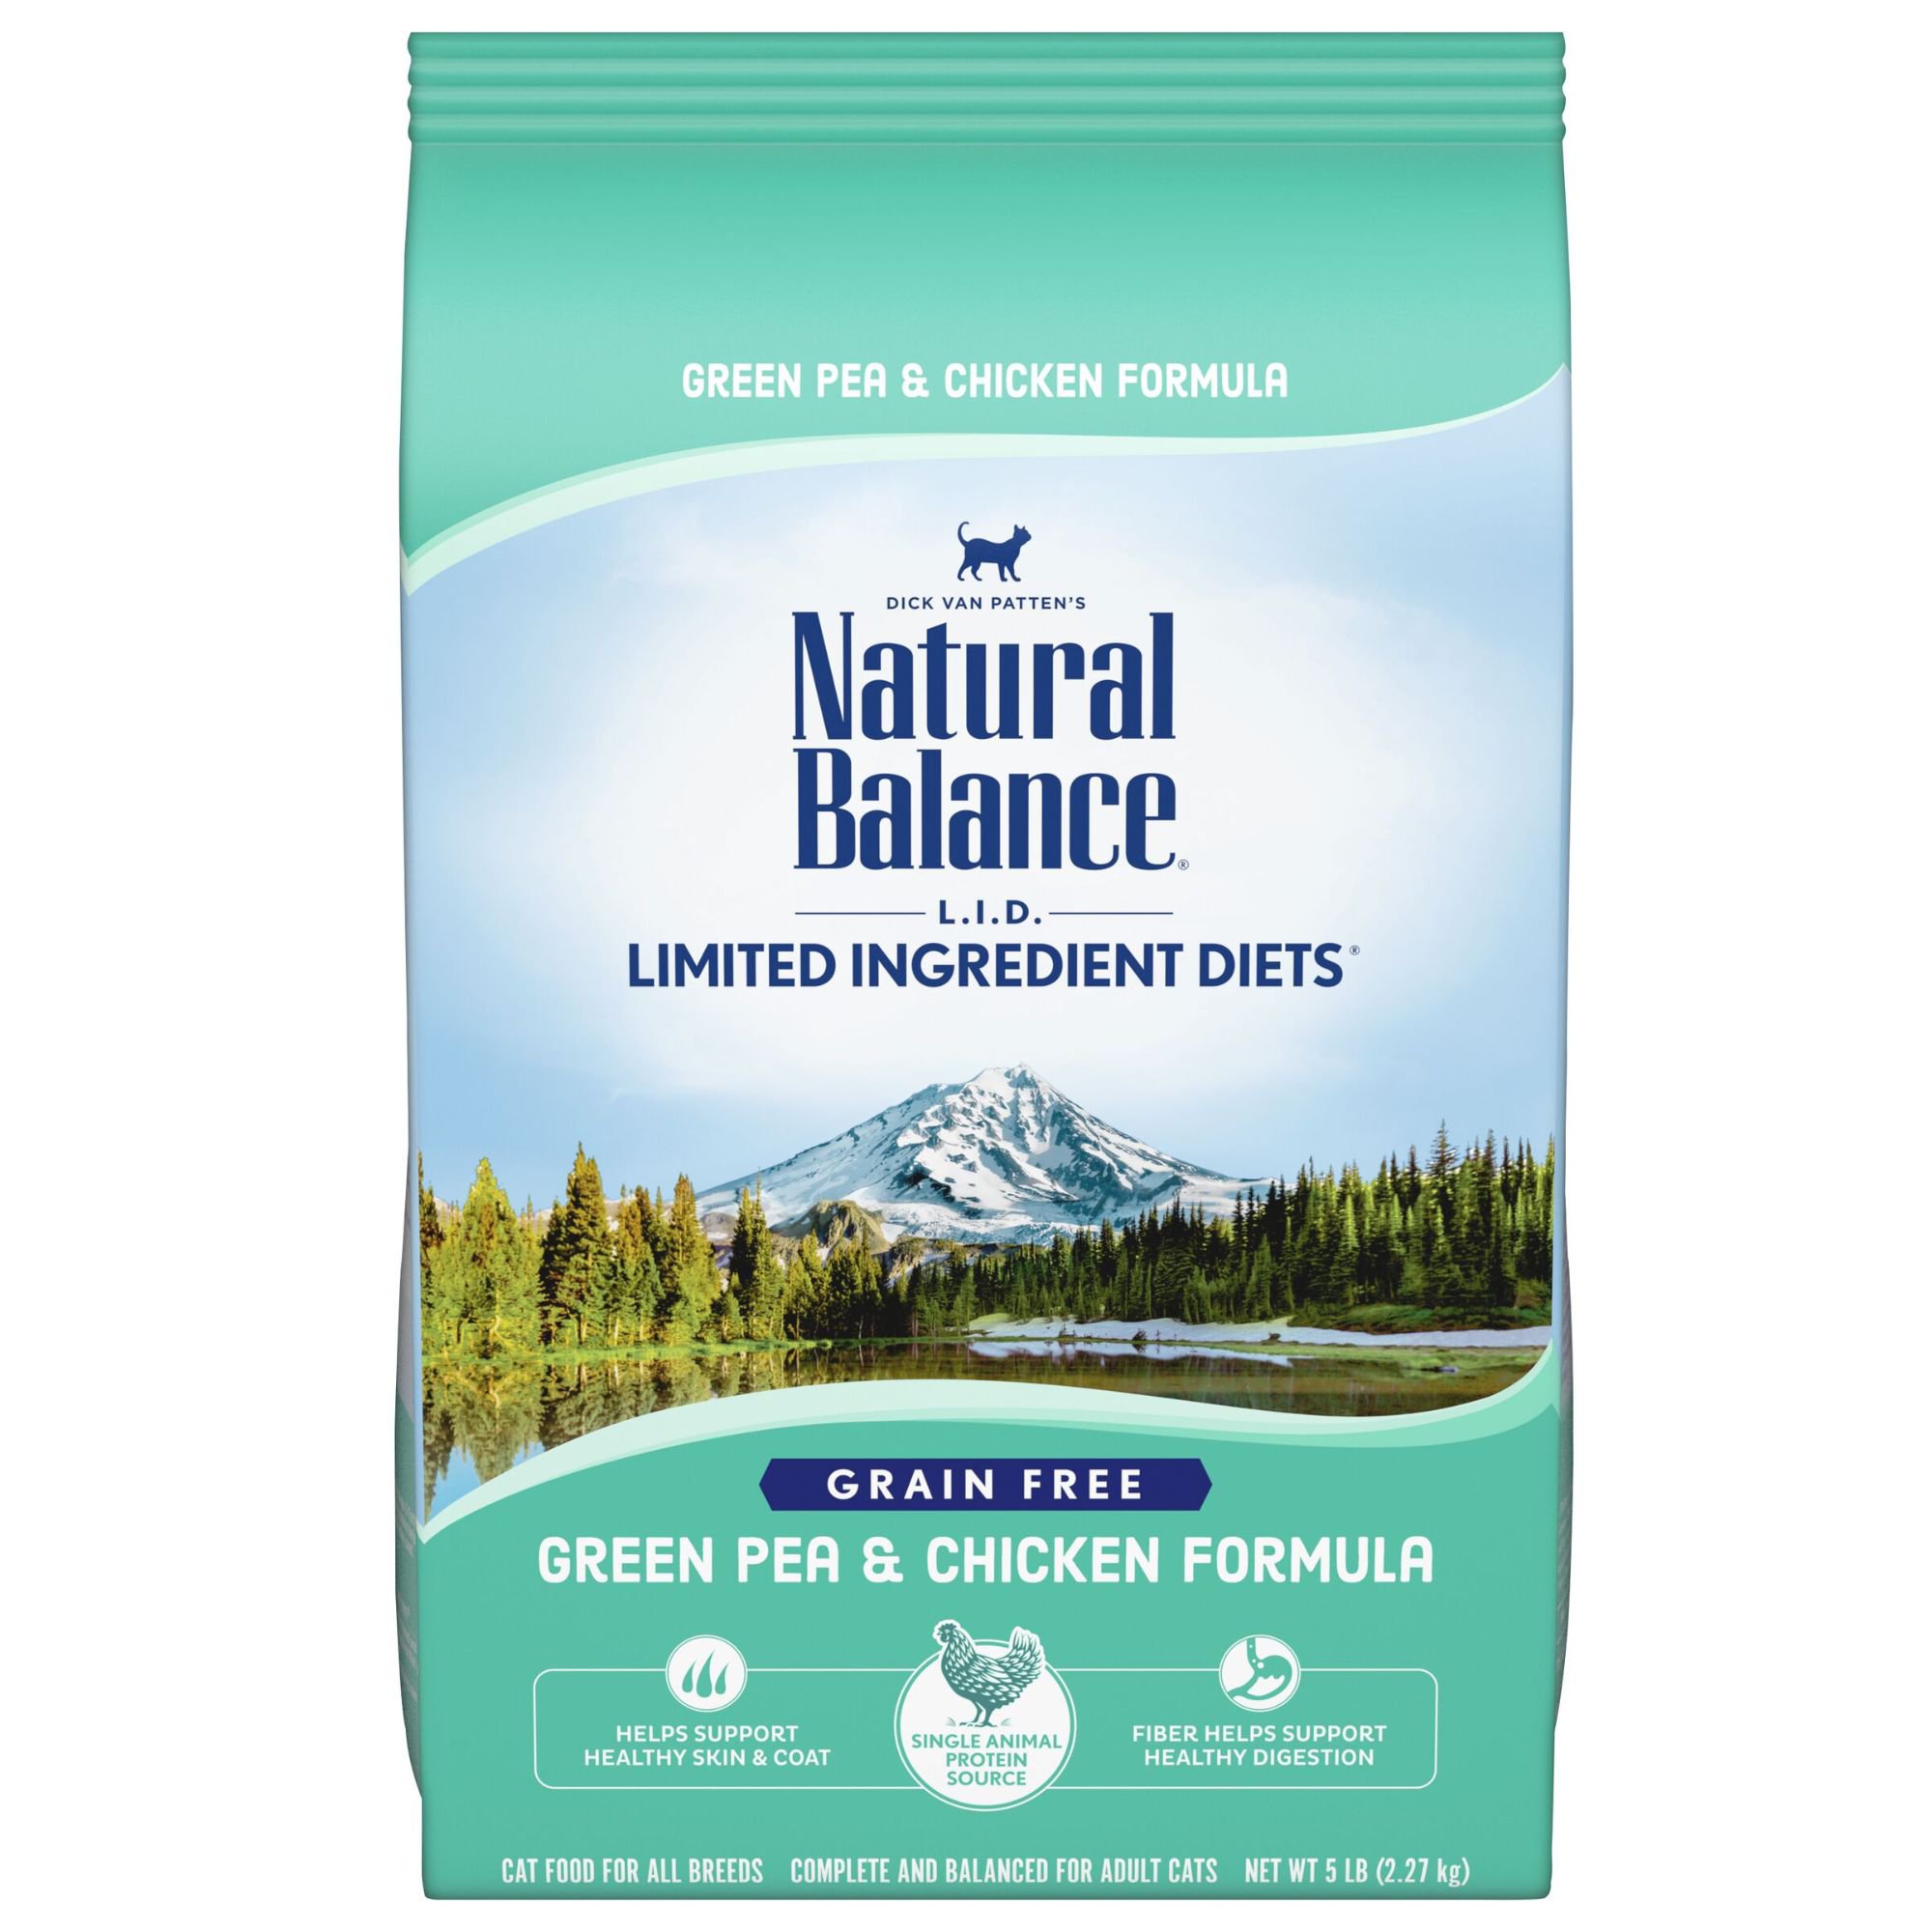 Natural Balance Limited Ingredient Diets Green Pea & Chicken Formula